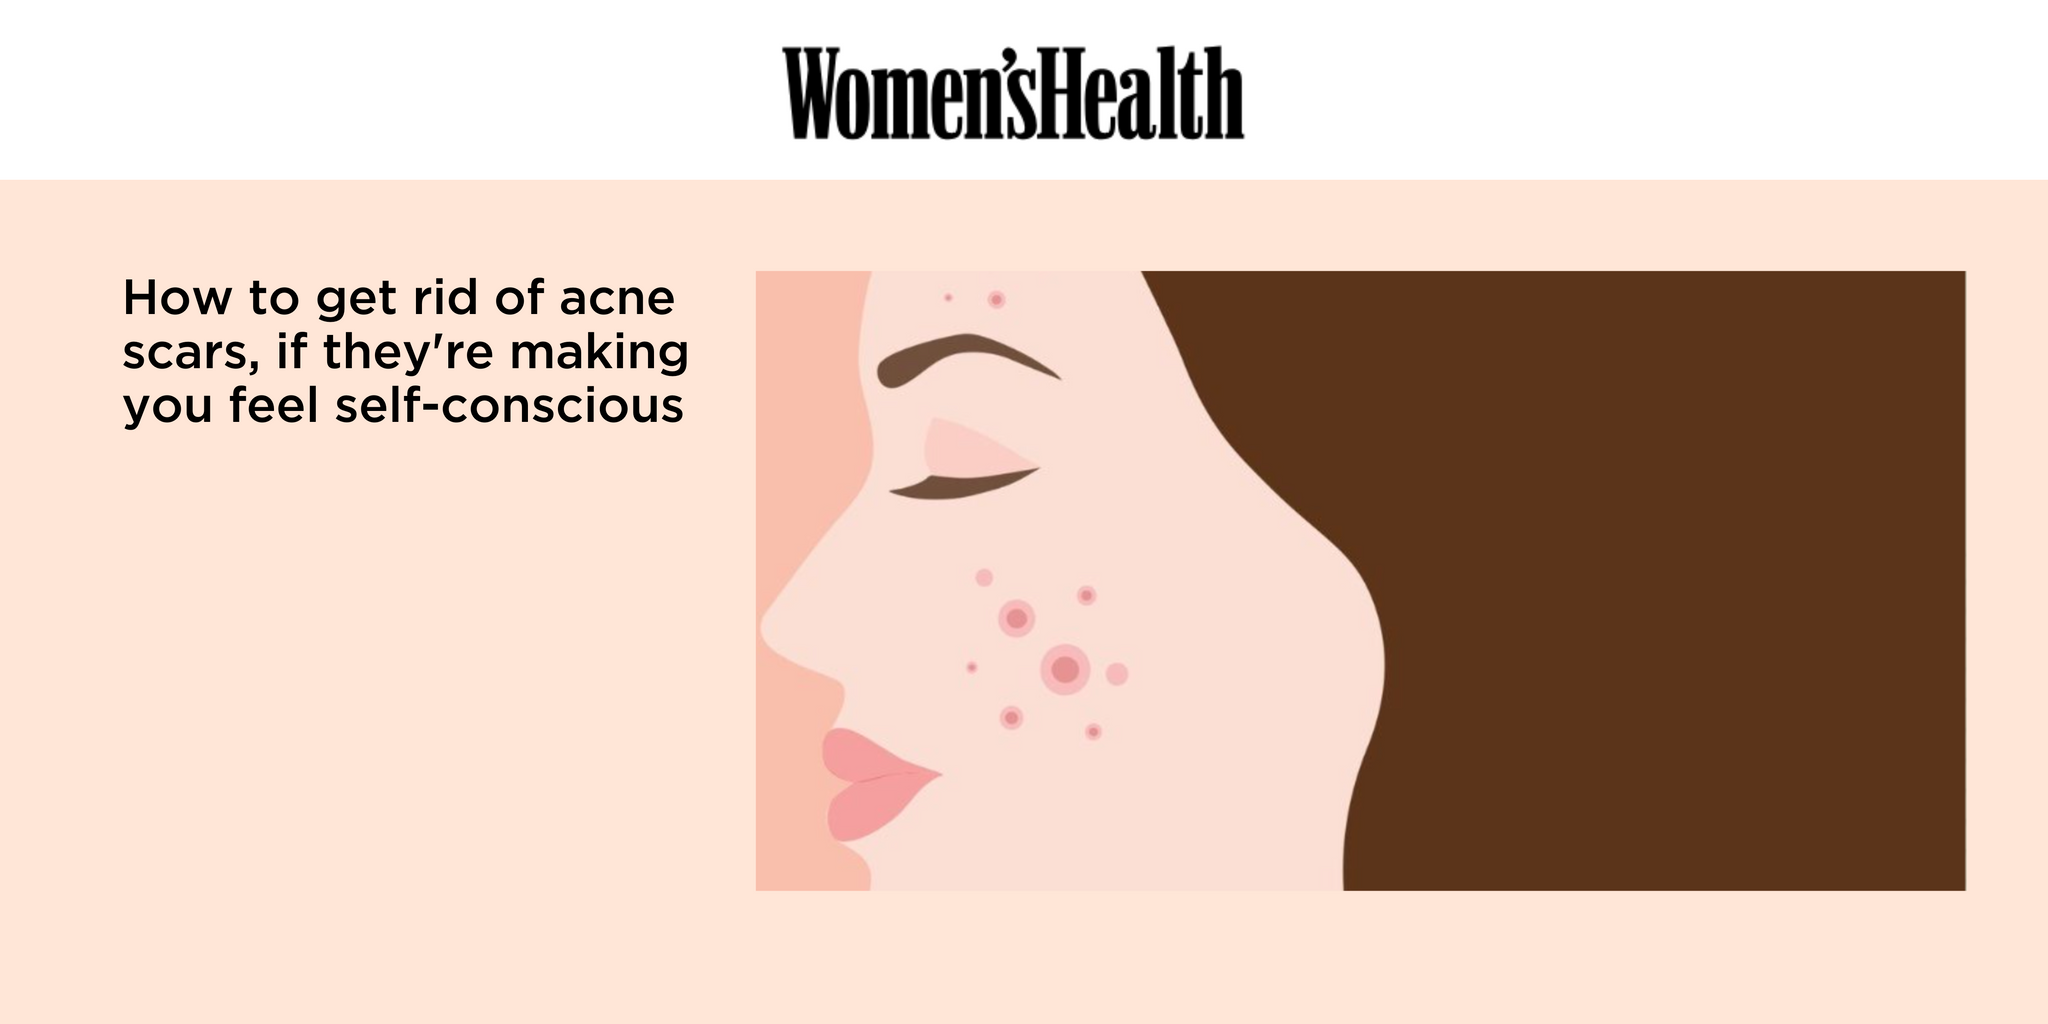 How to get rid of acne scars, if they're making you feel self-conscious